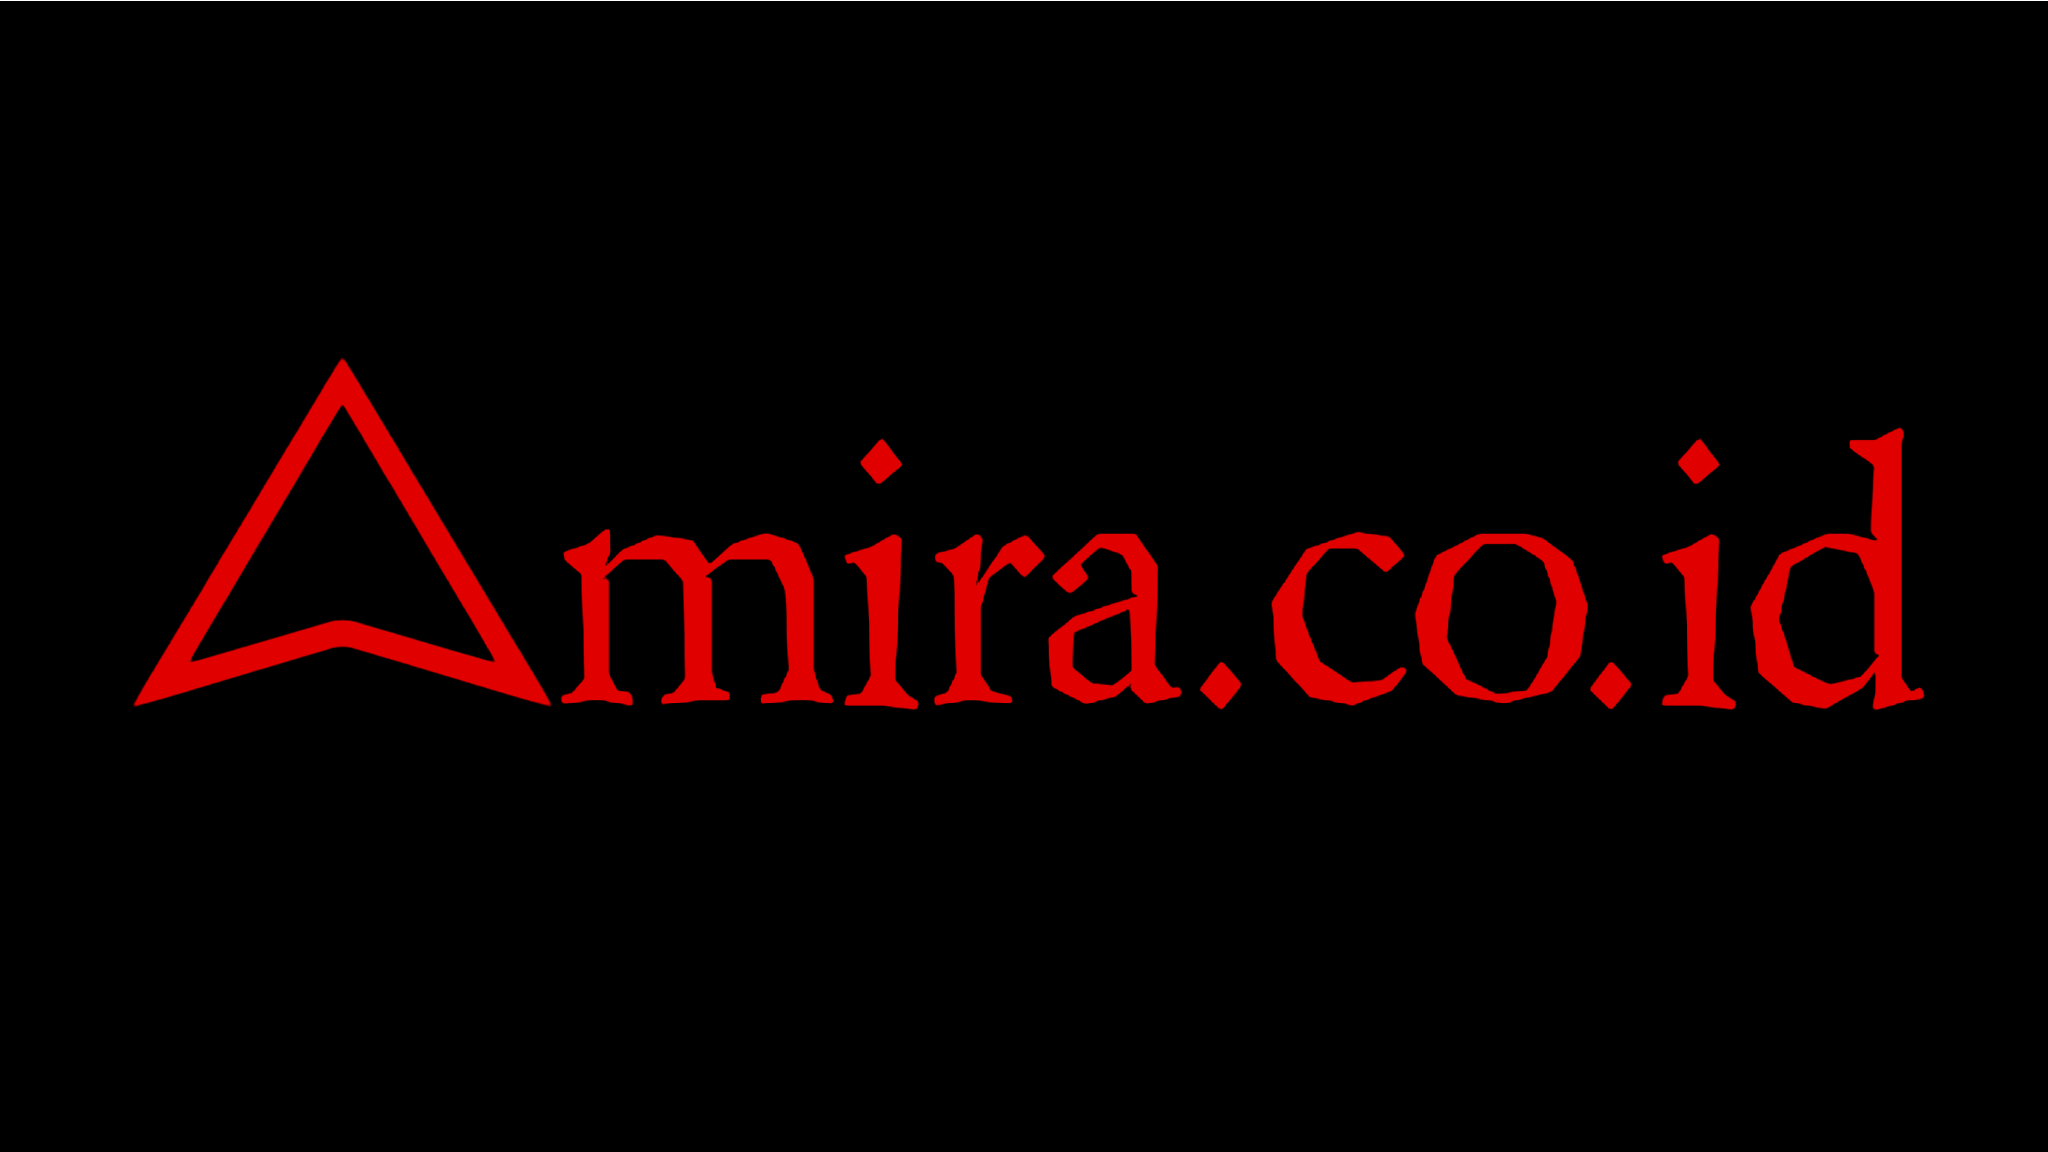 Tentang amira.co.id images